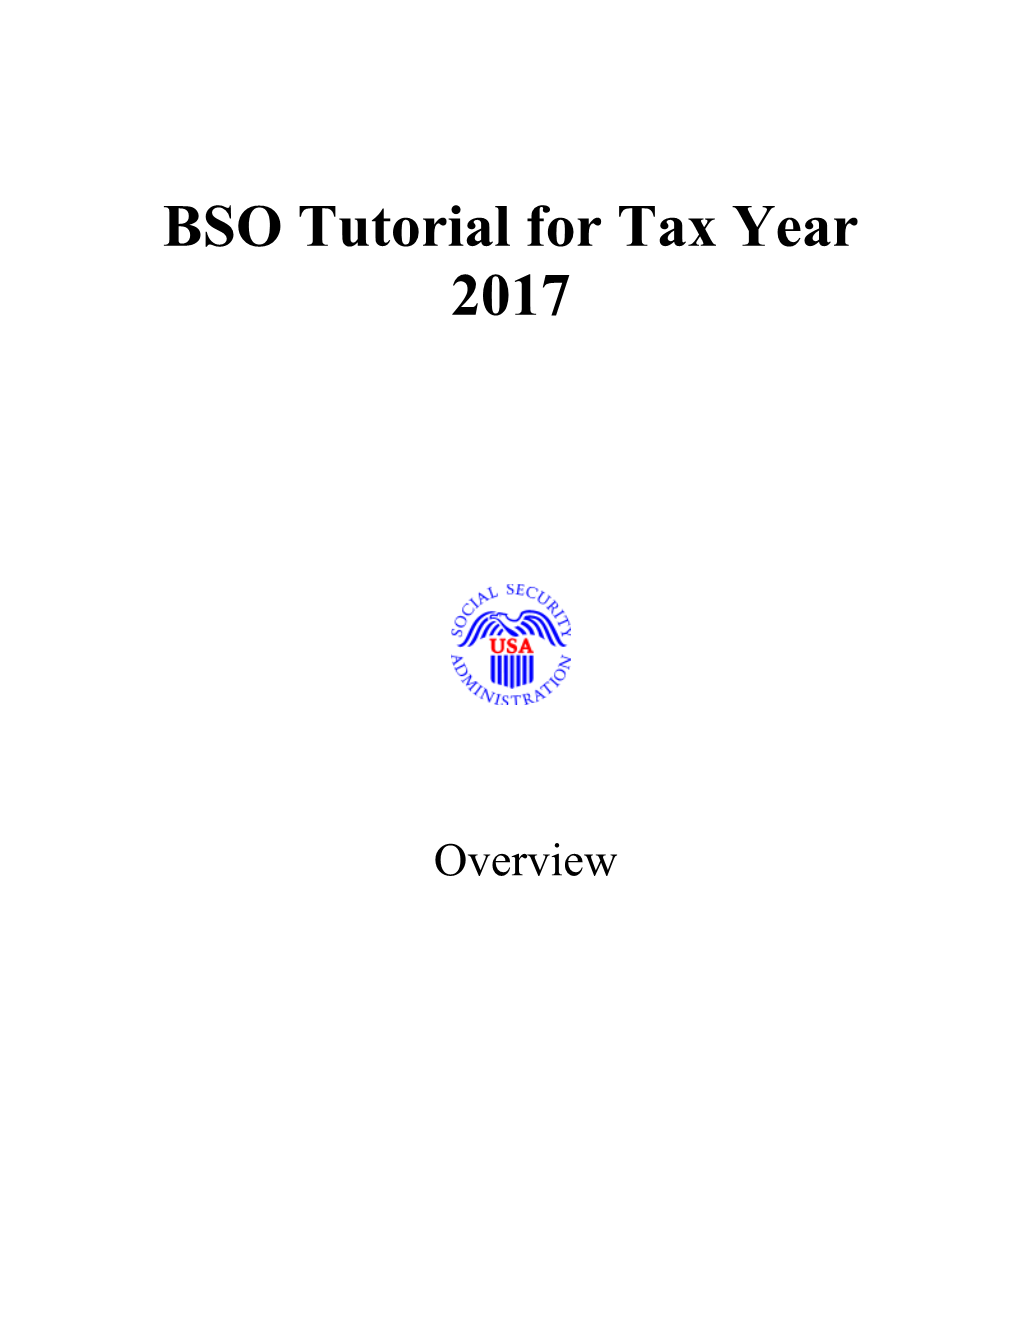 BSO Tutorial for Tax Year 2017